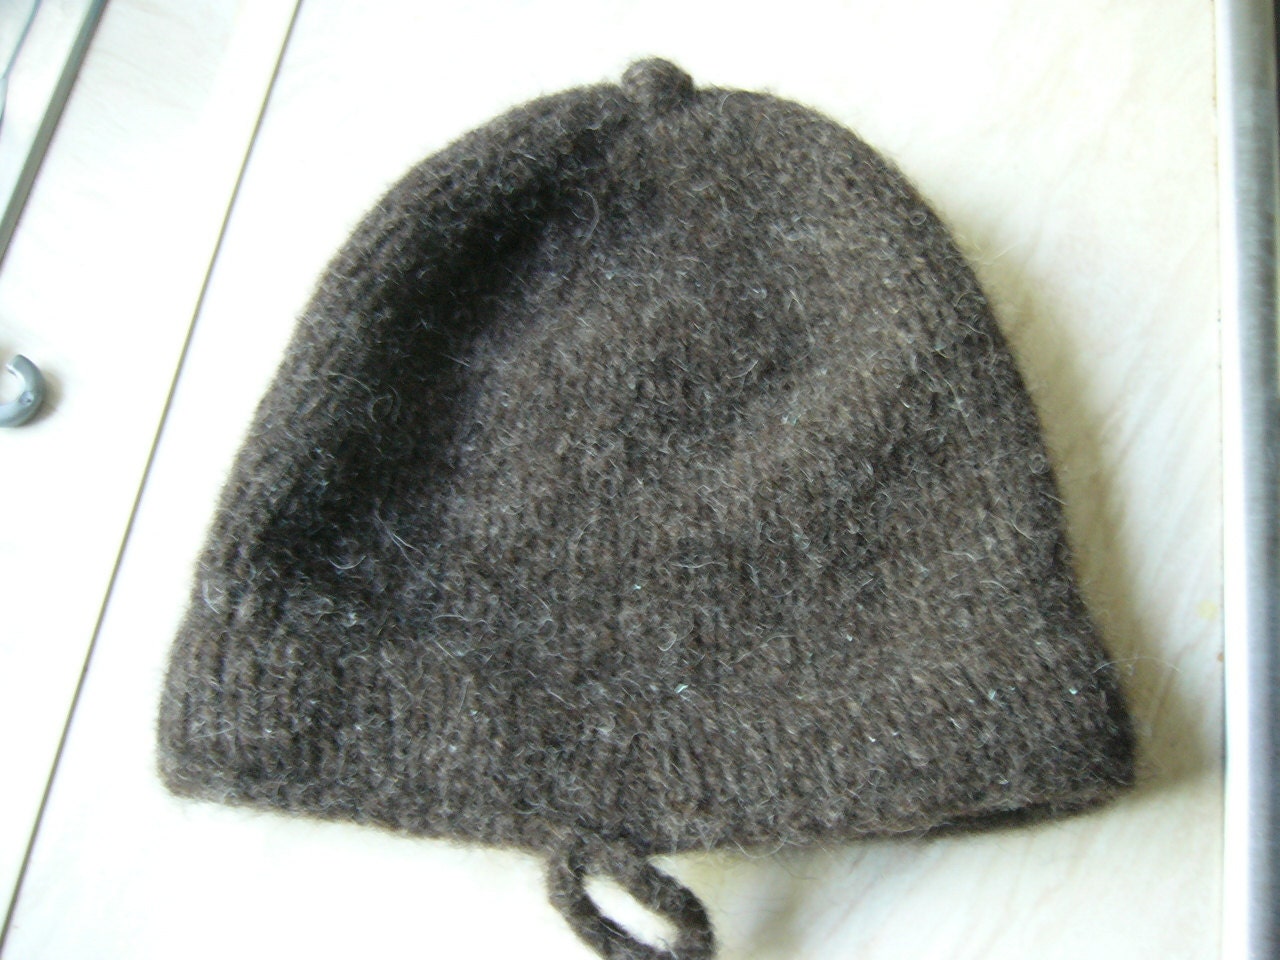 Monmouth Cap, handknitted using 100% wool, size small or medium